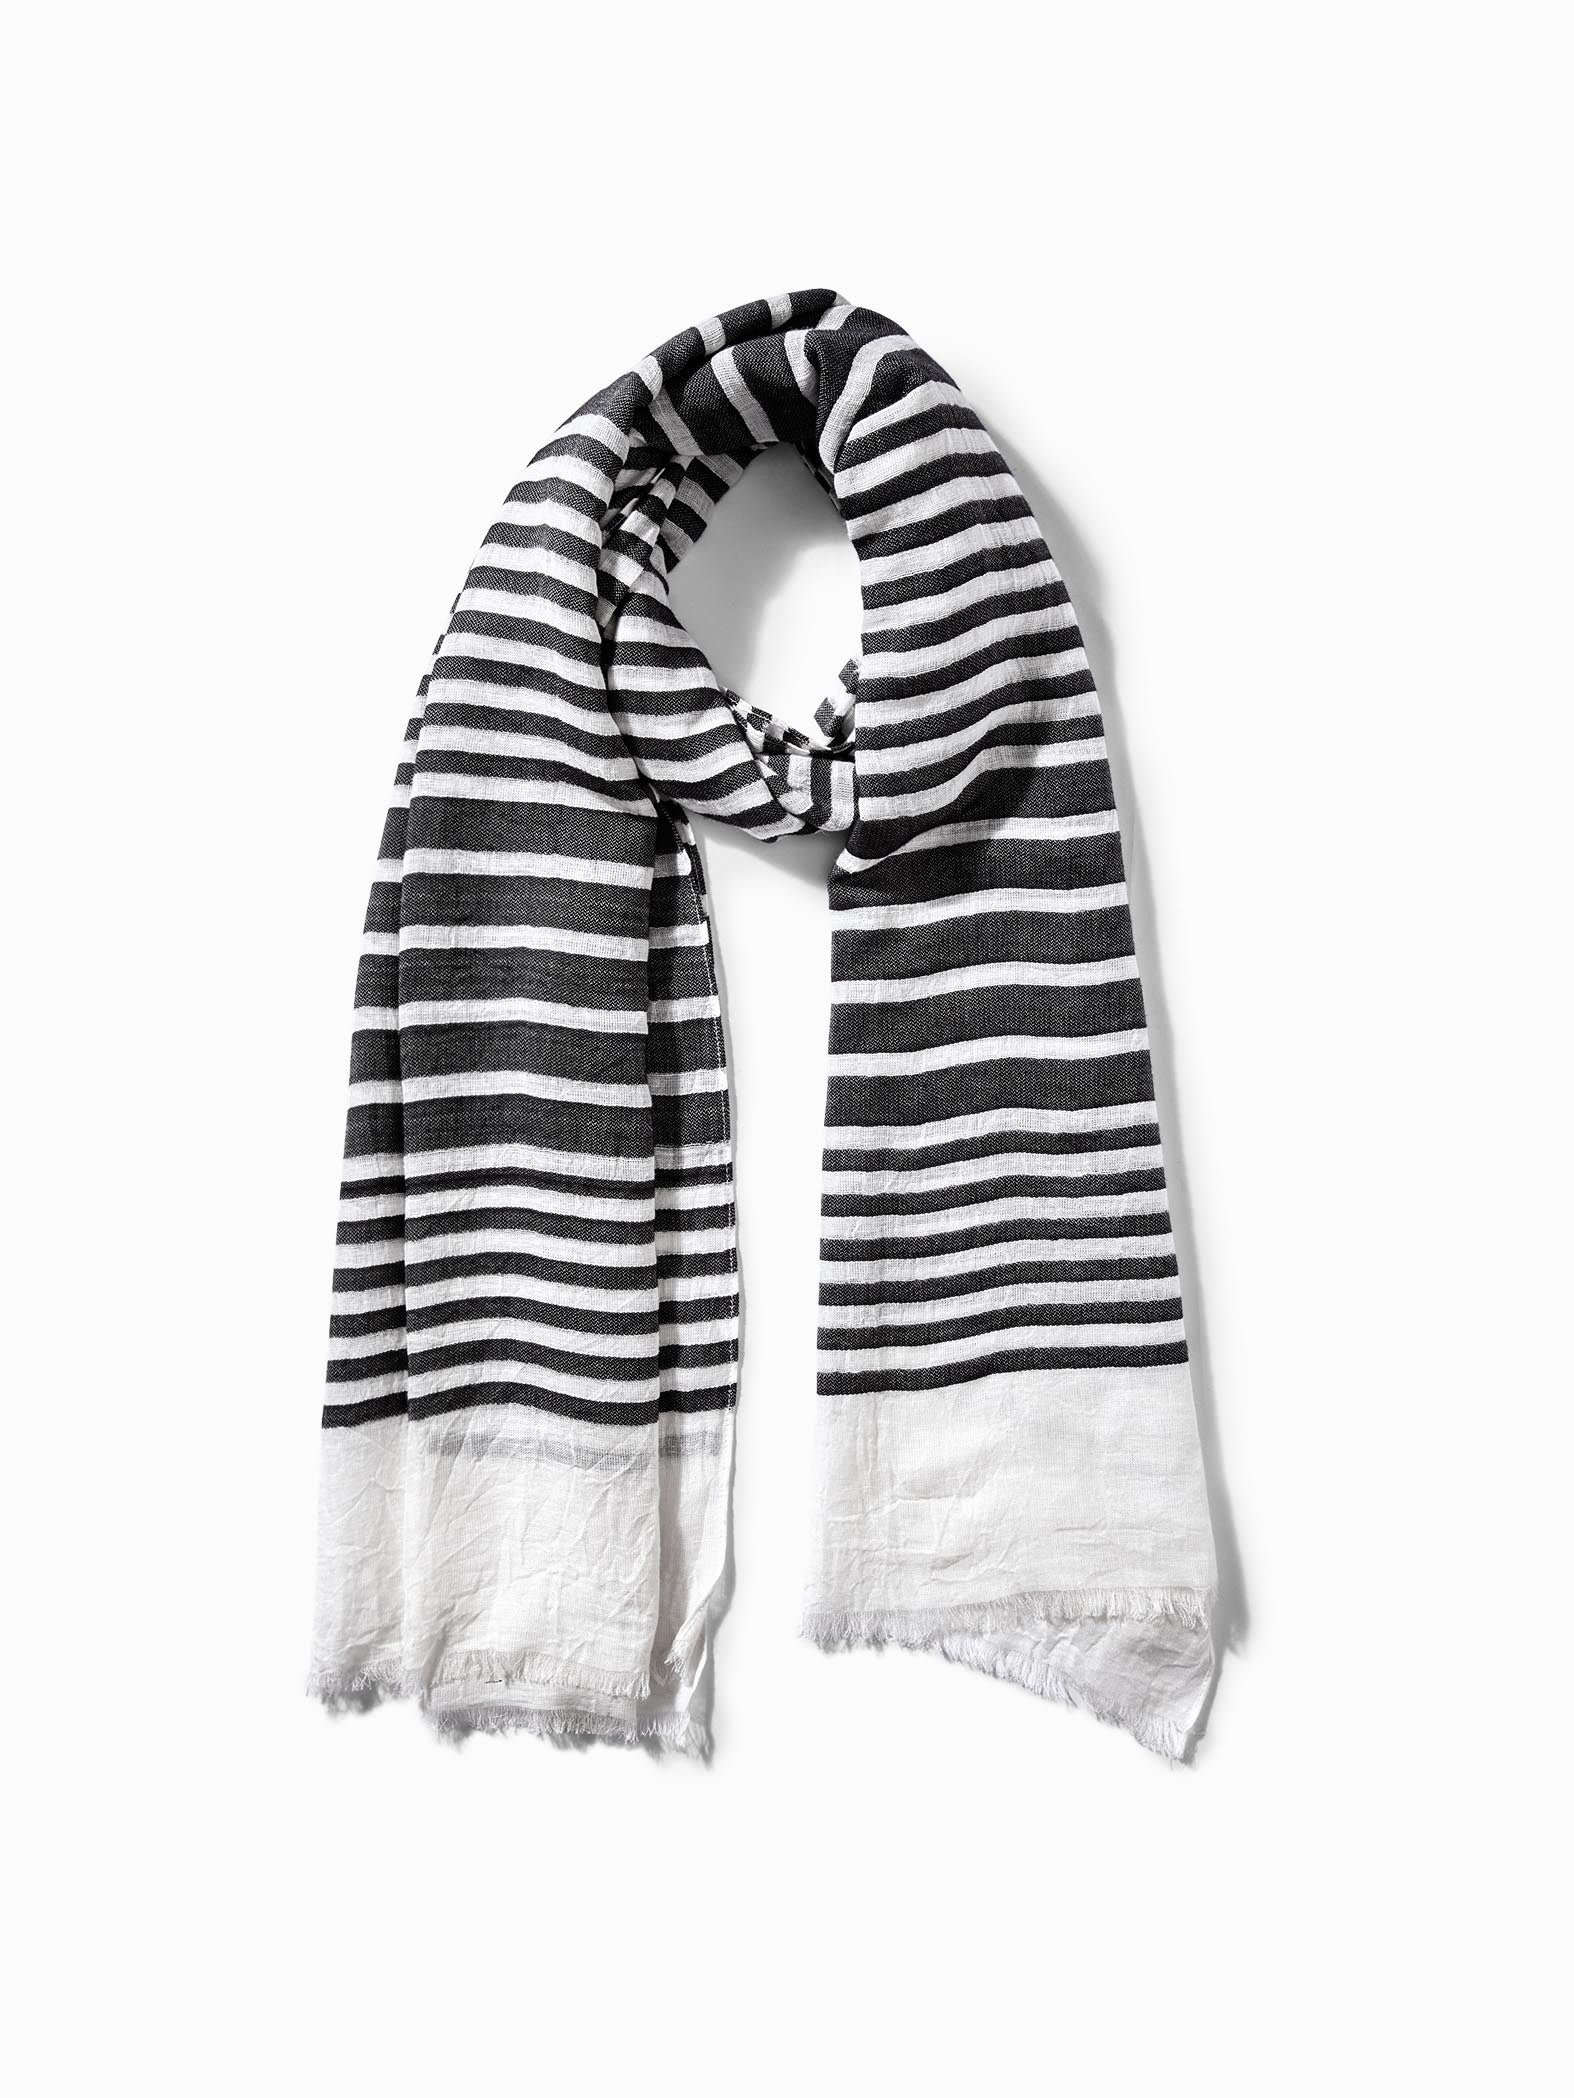 Monochrome Lined Scarf